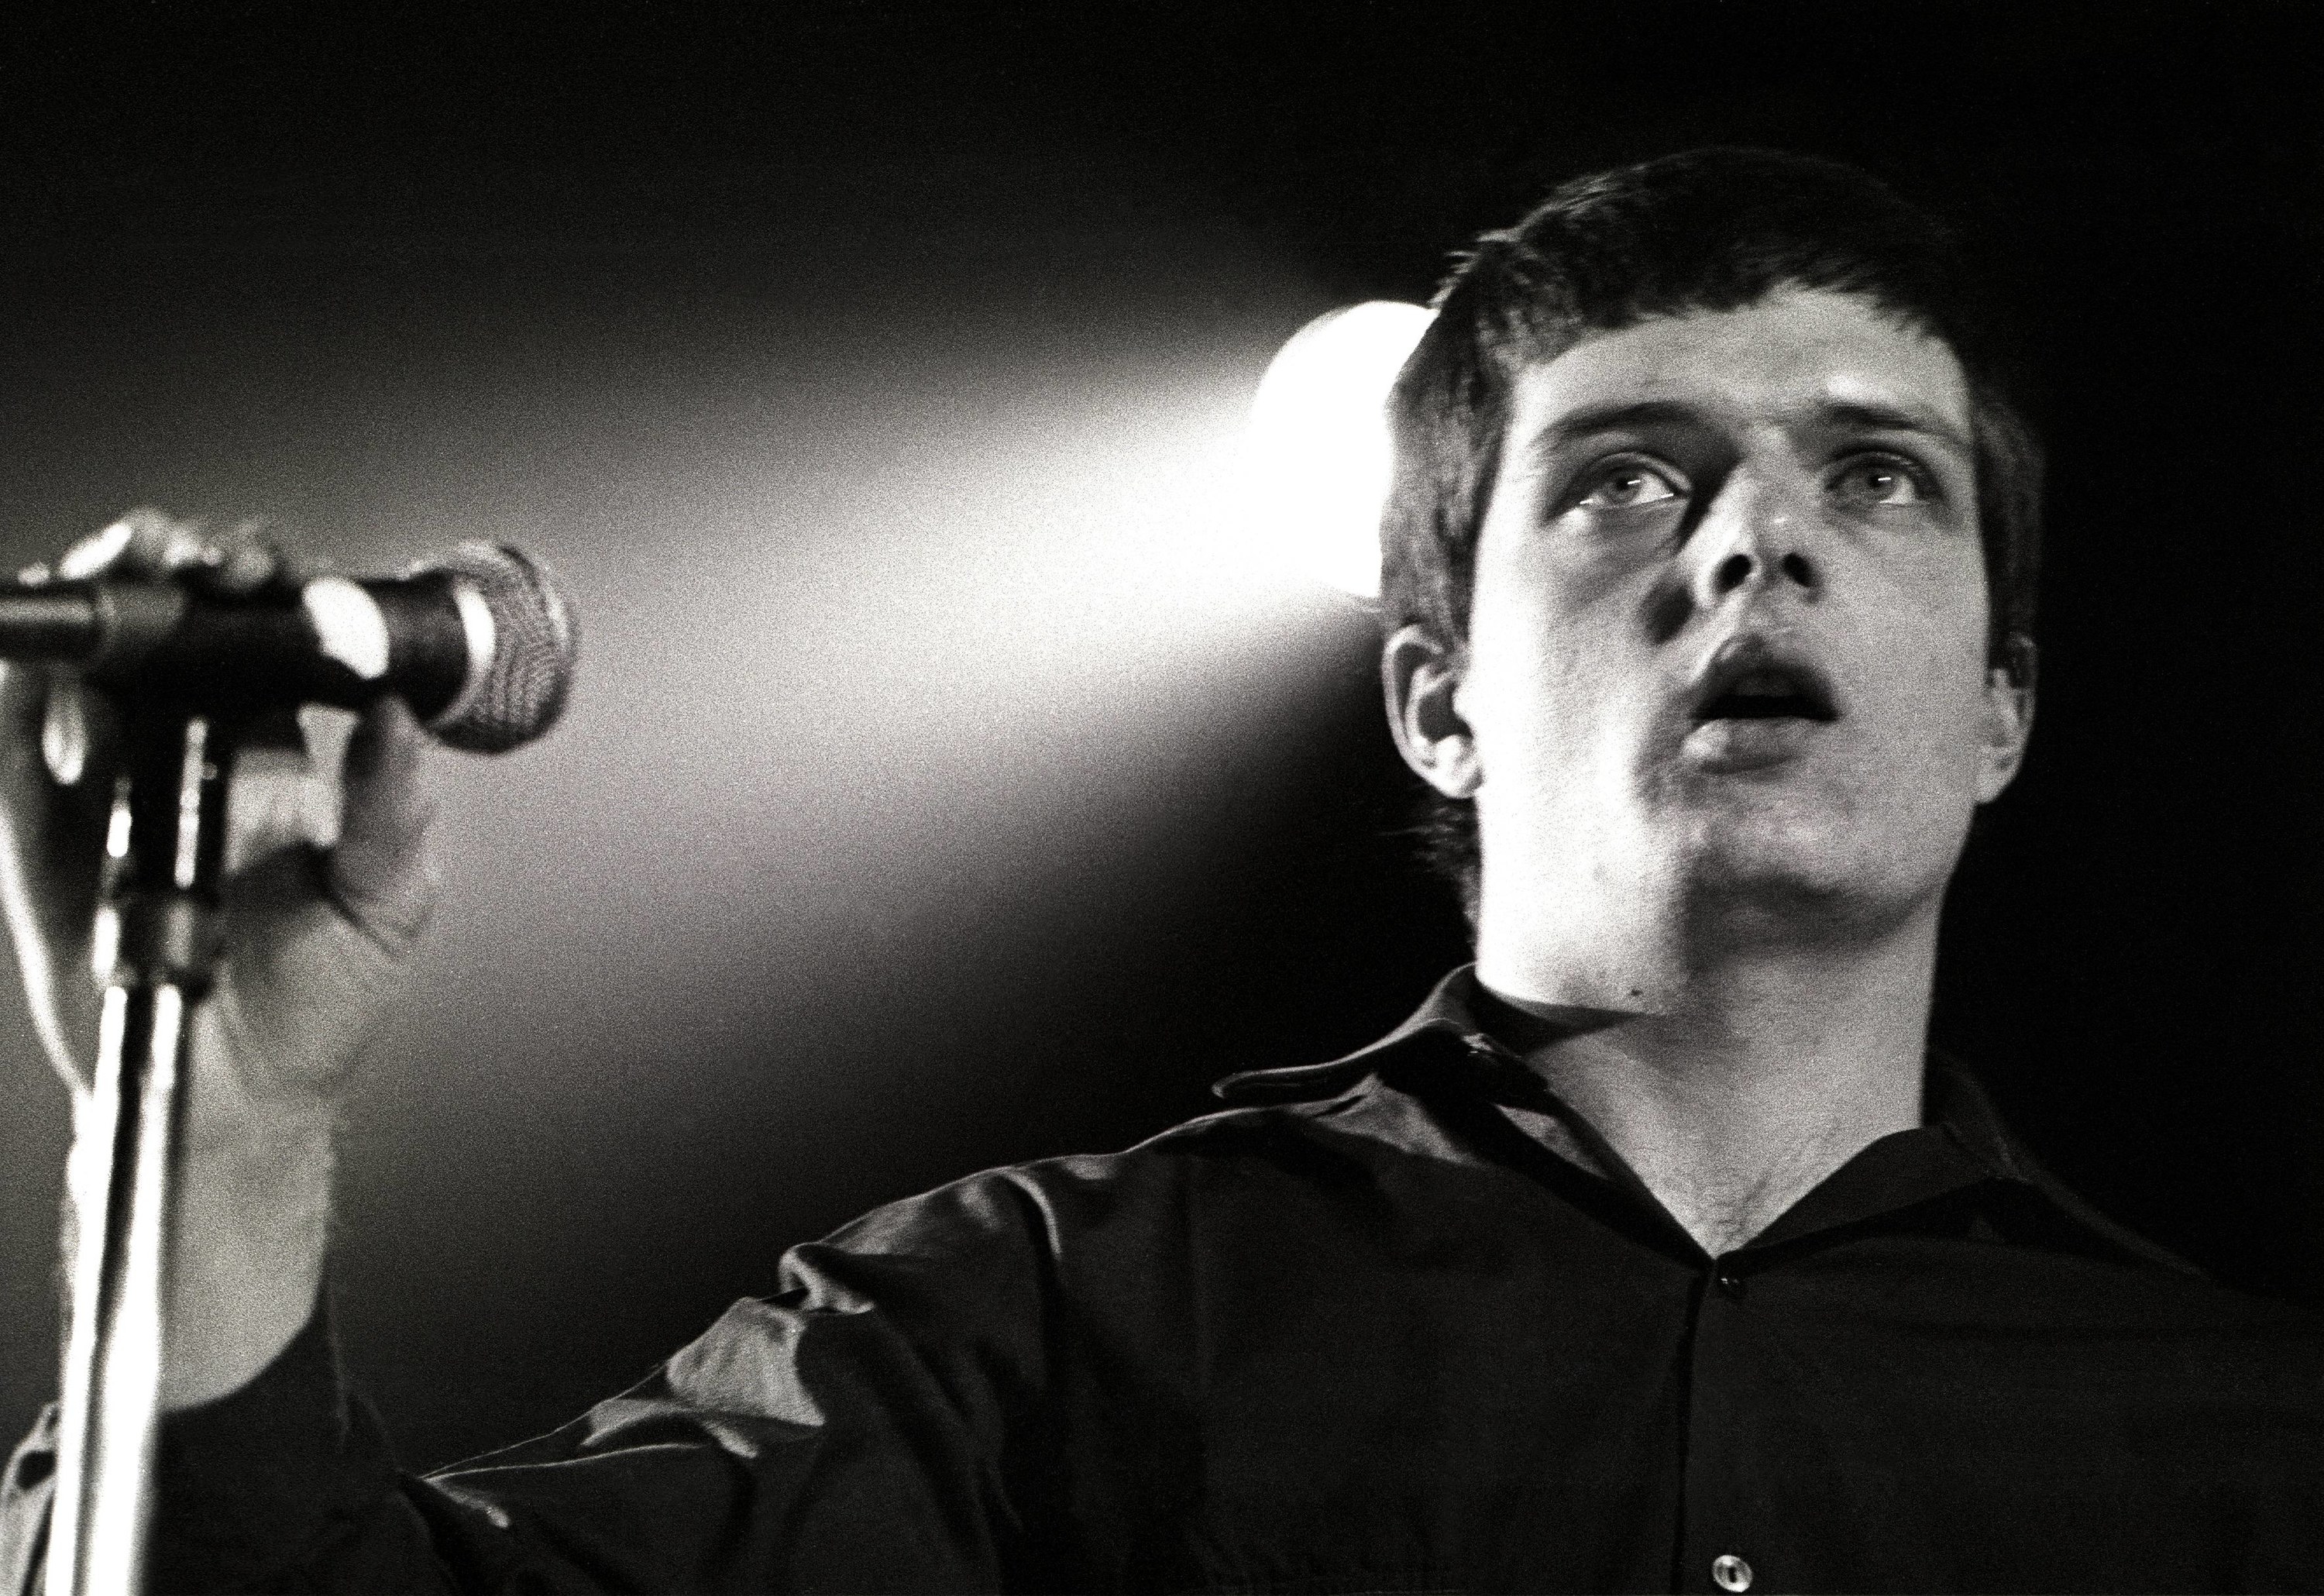 Ian Curtis standing by a mic